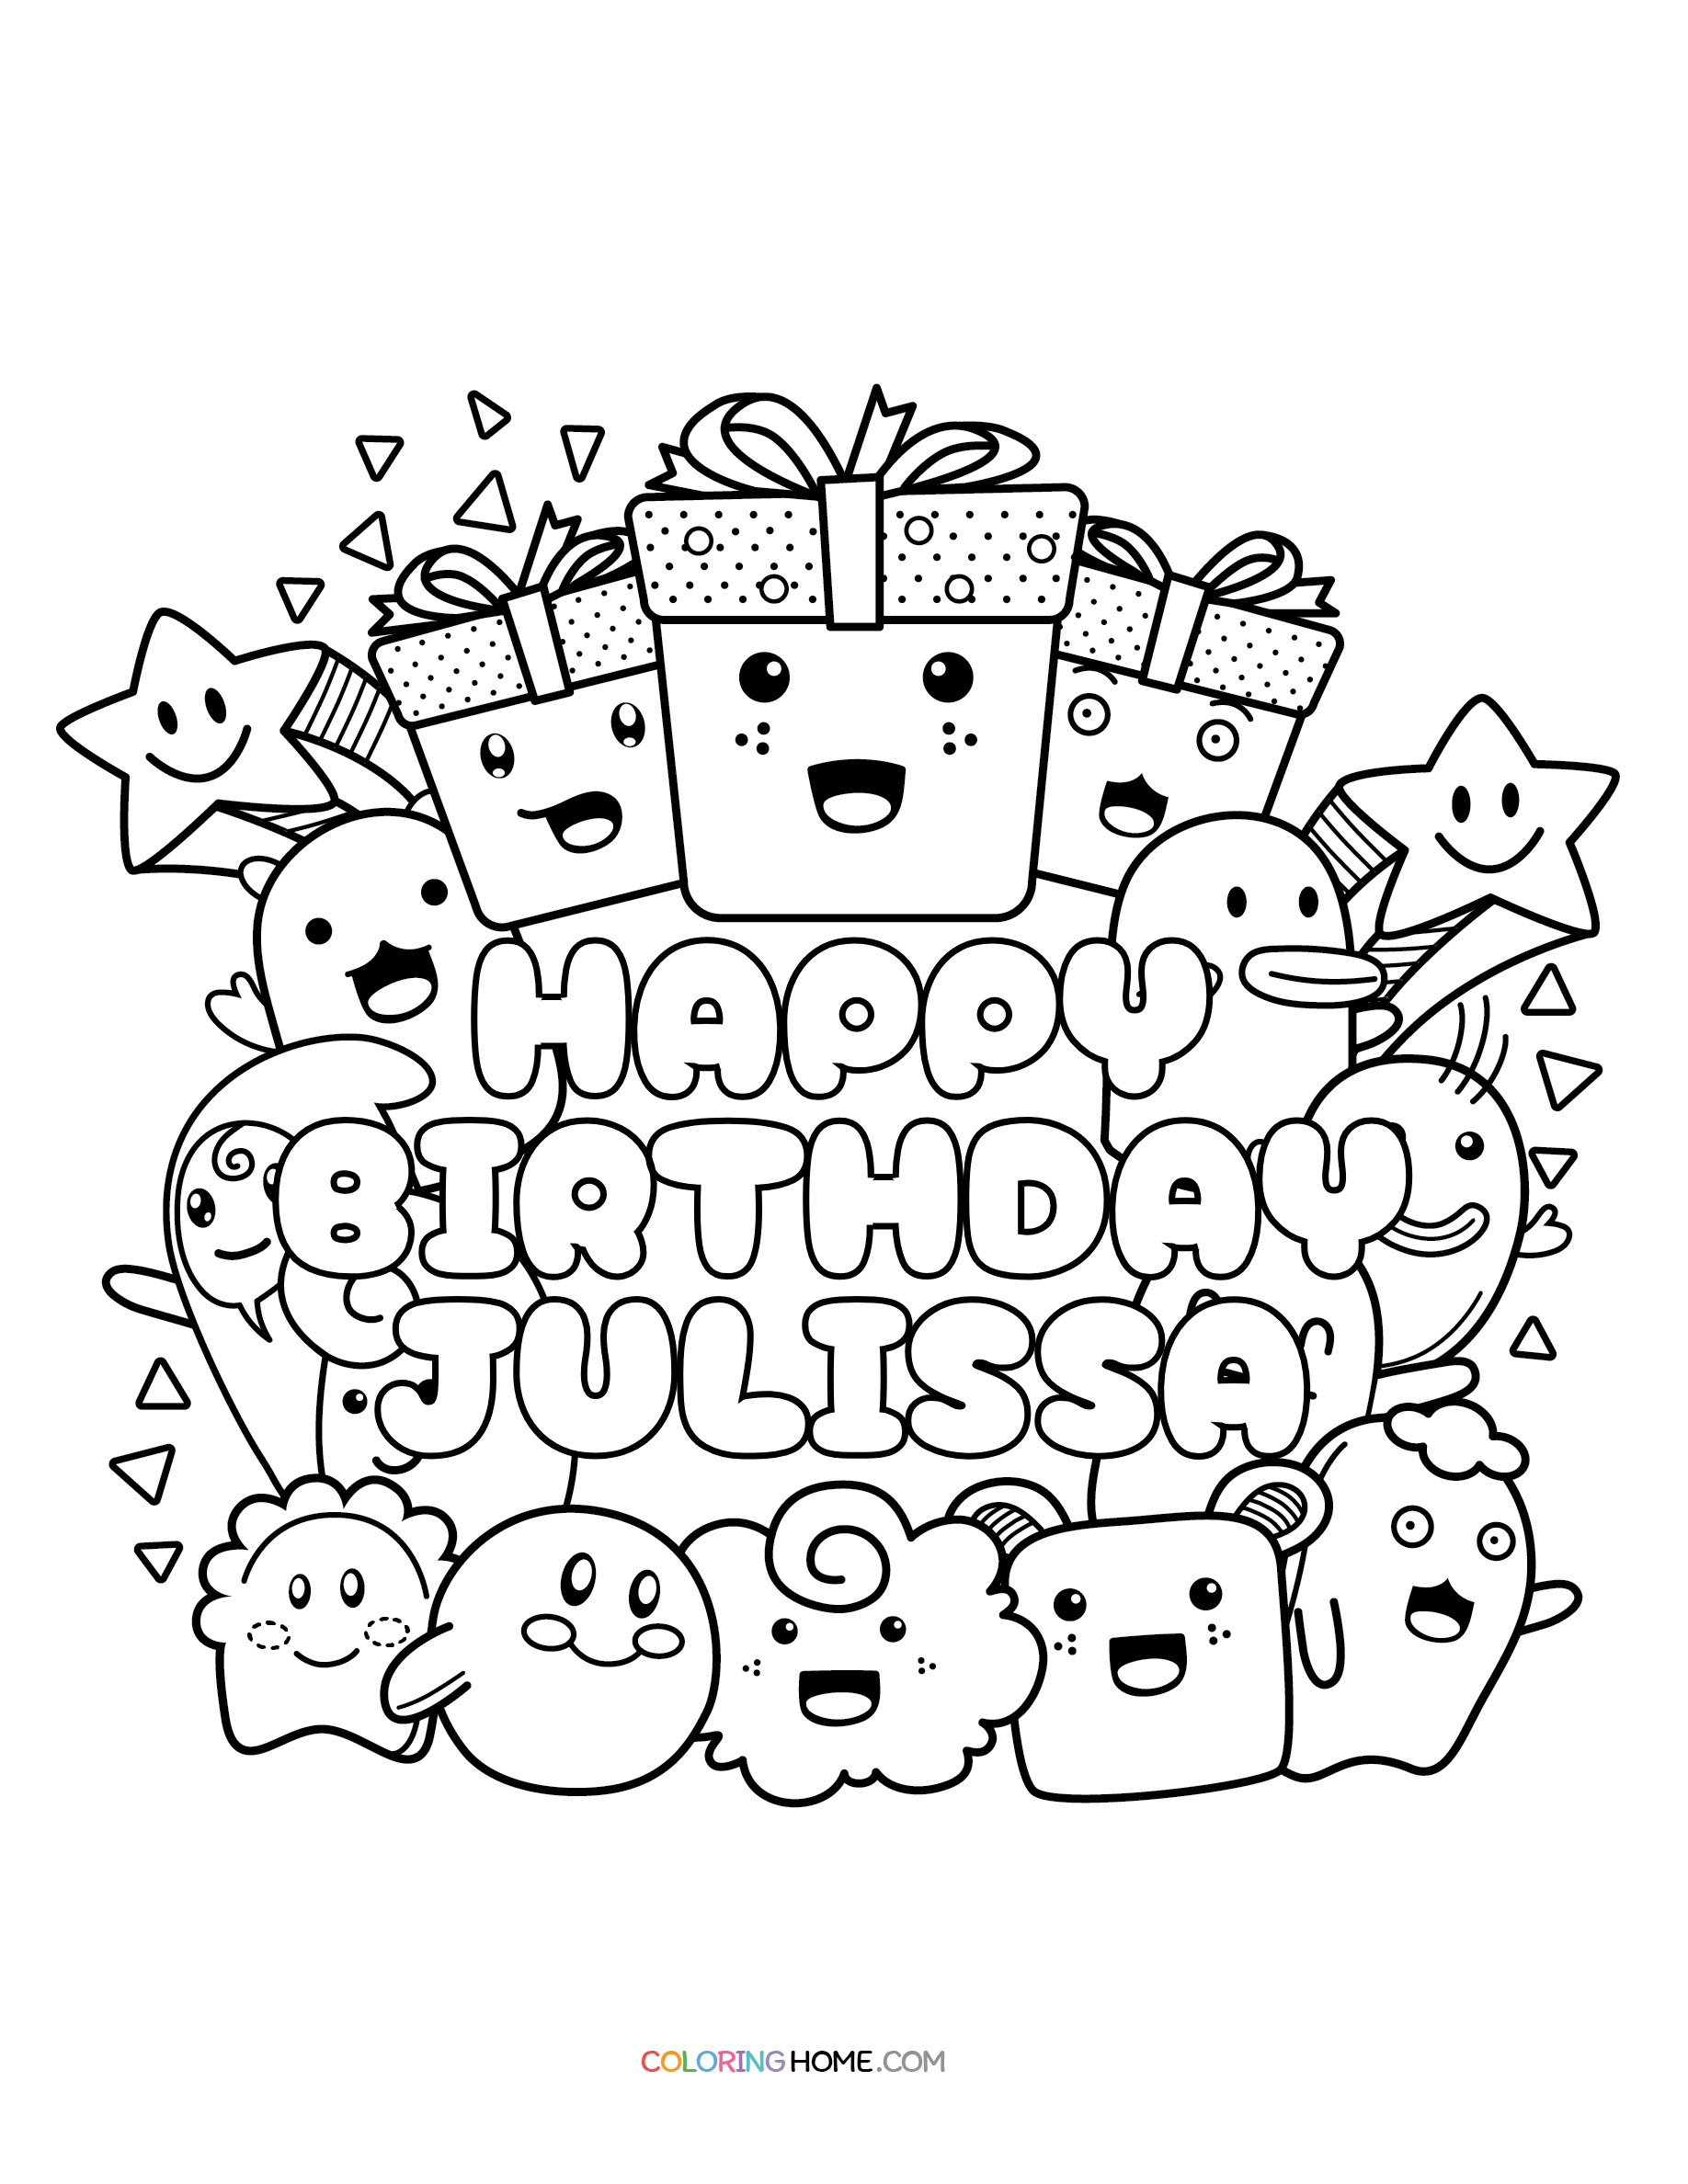 Happy Birthday Julissa coloring page